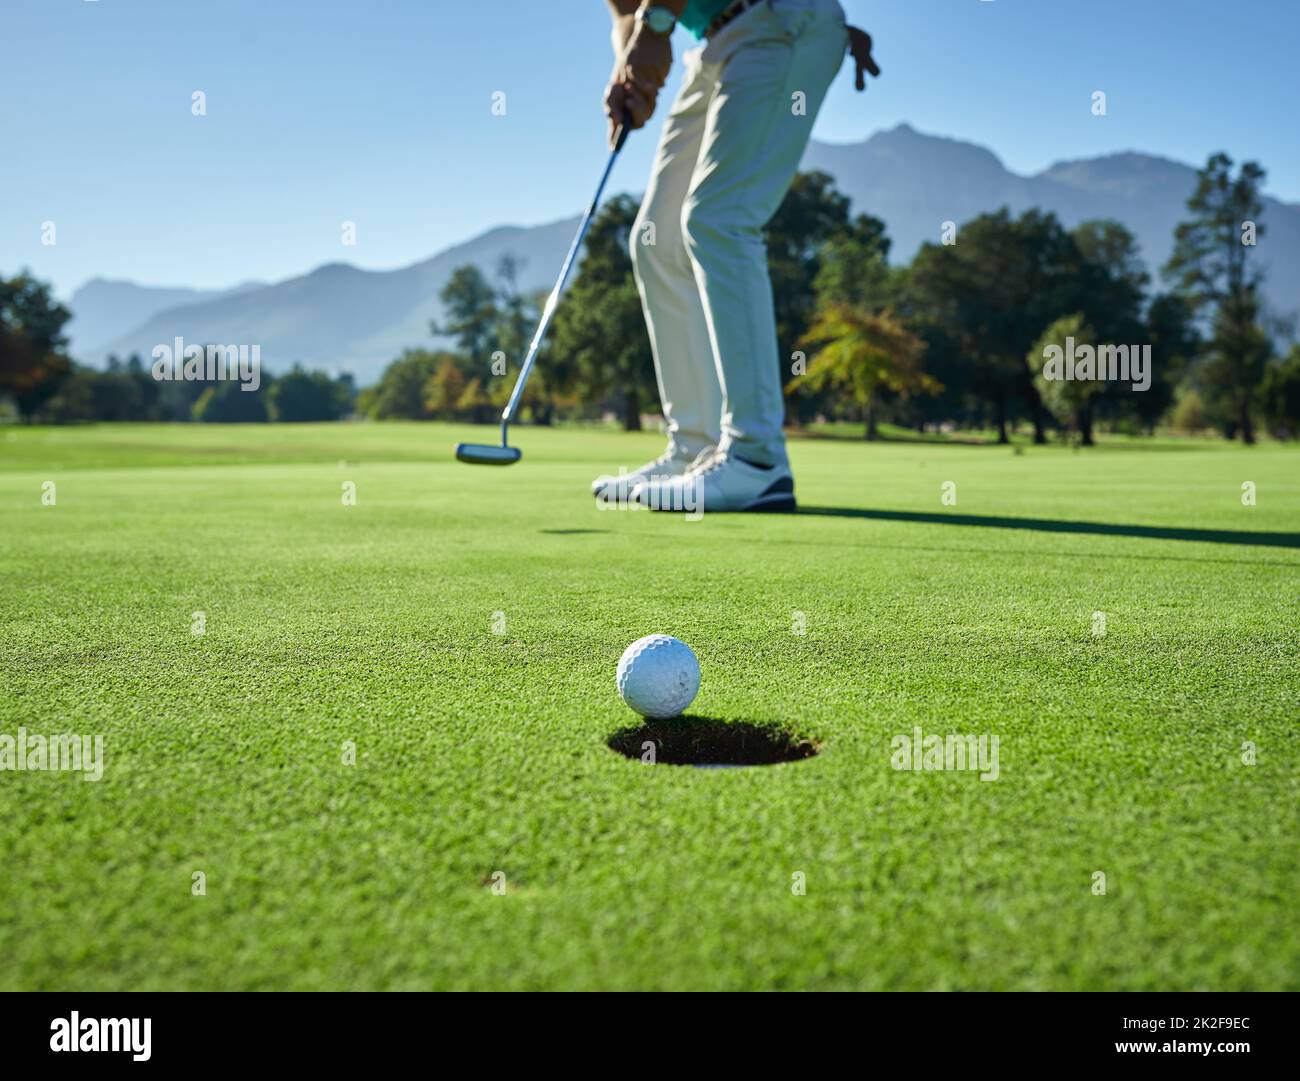 This is going to be in. Low angle shot of a unrecognizable man hitting a golfball into a hole on a golf course. Stock Photo